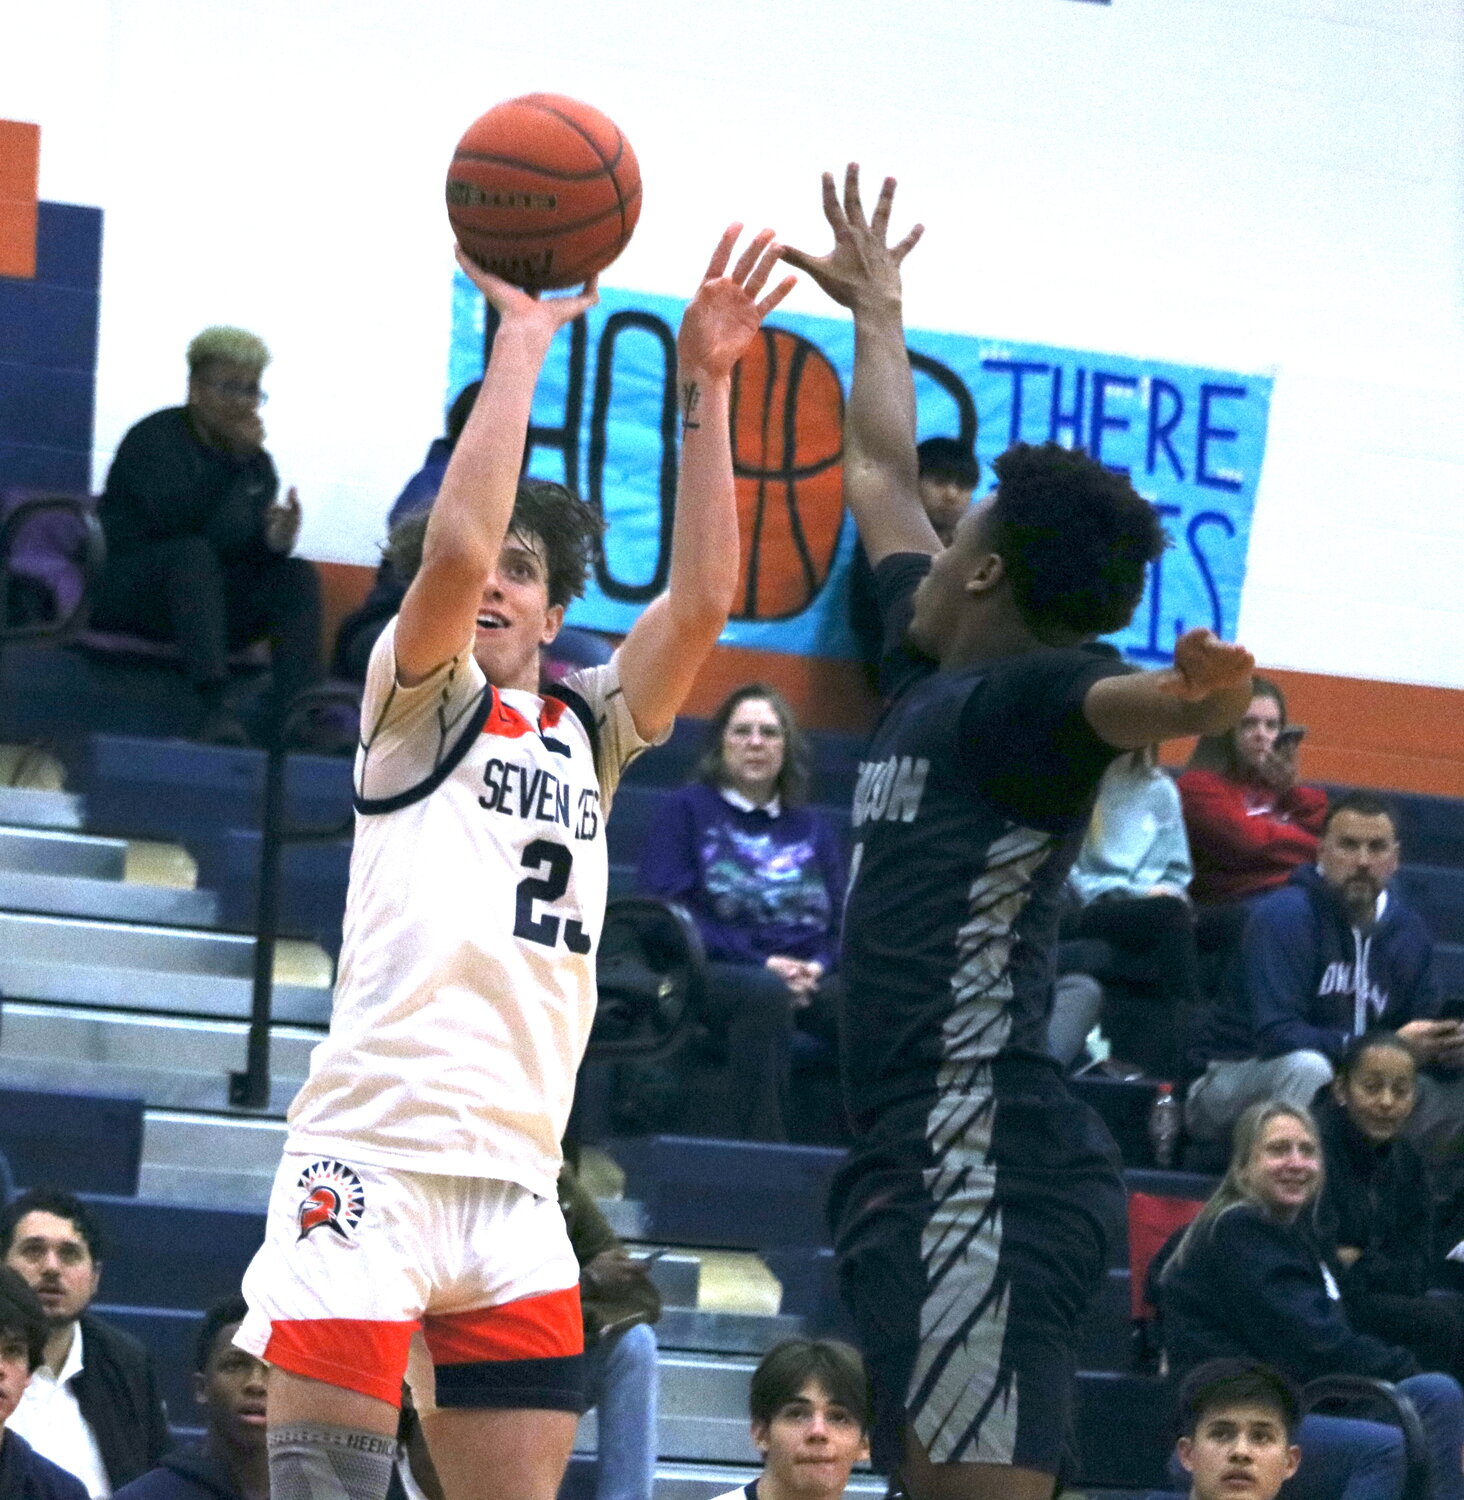 Brett Norton shoots the ball during Monday's game between Seven Lakes and Pearland Dawson at the Seven Lakes gym.